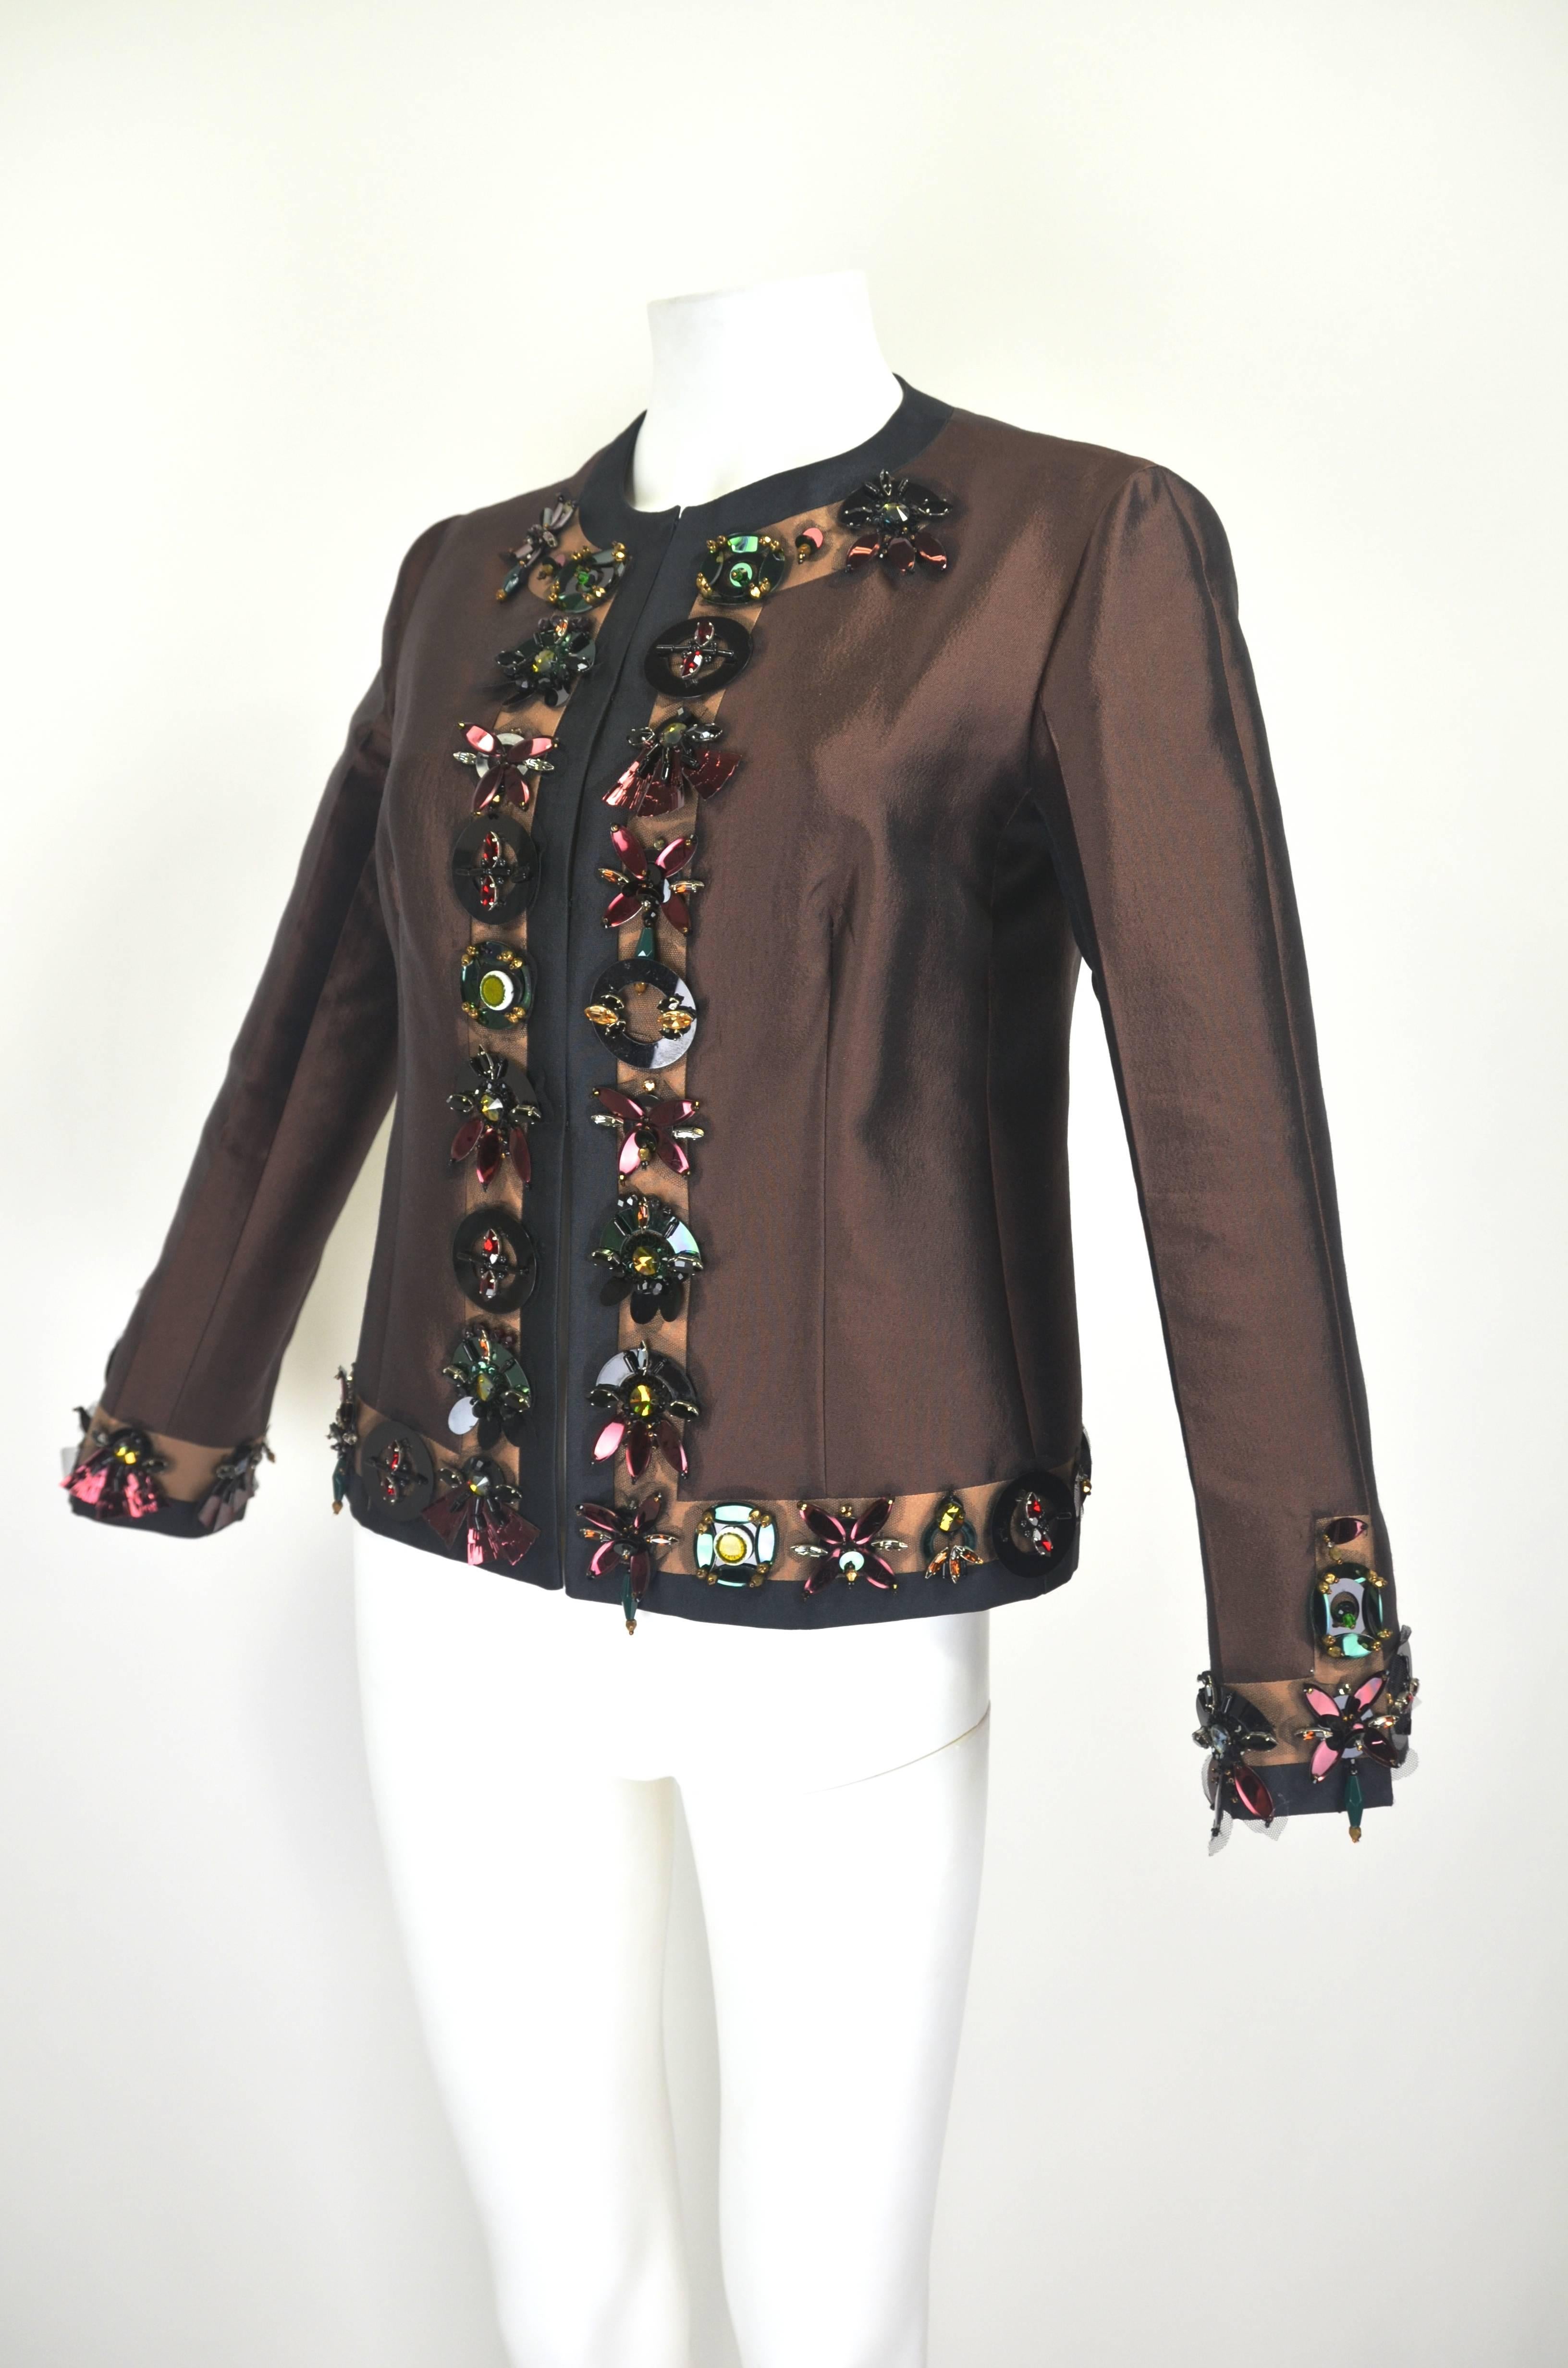 Prada Silk Wool Evening Jacket with Paillettes and Rhinestones In Excellent Condition For Sale In Los Angeles, CA